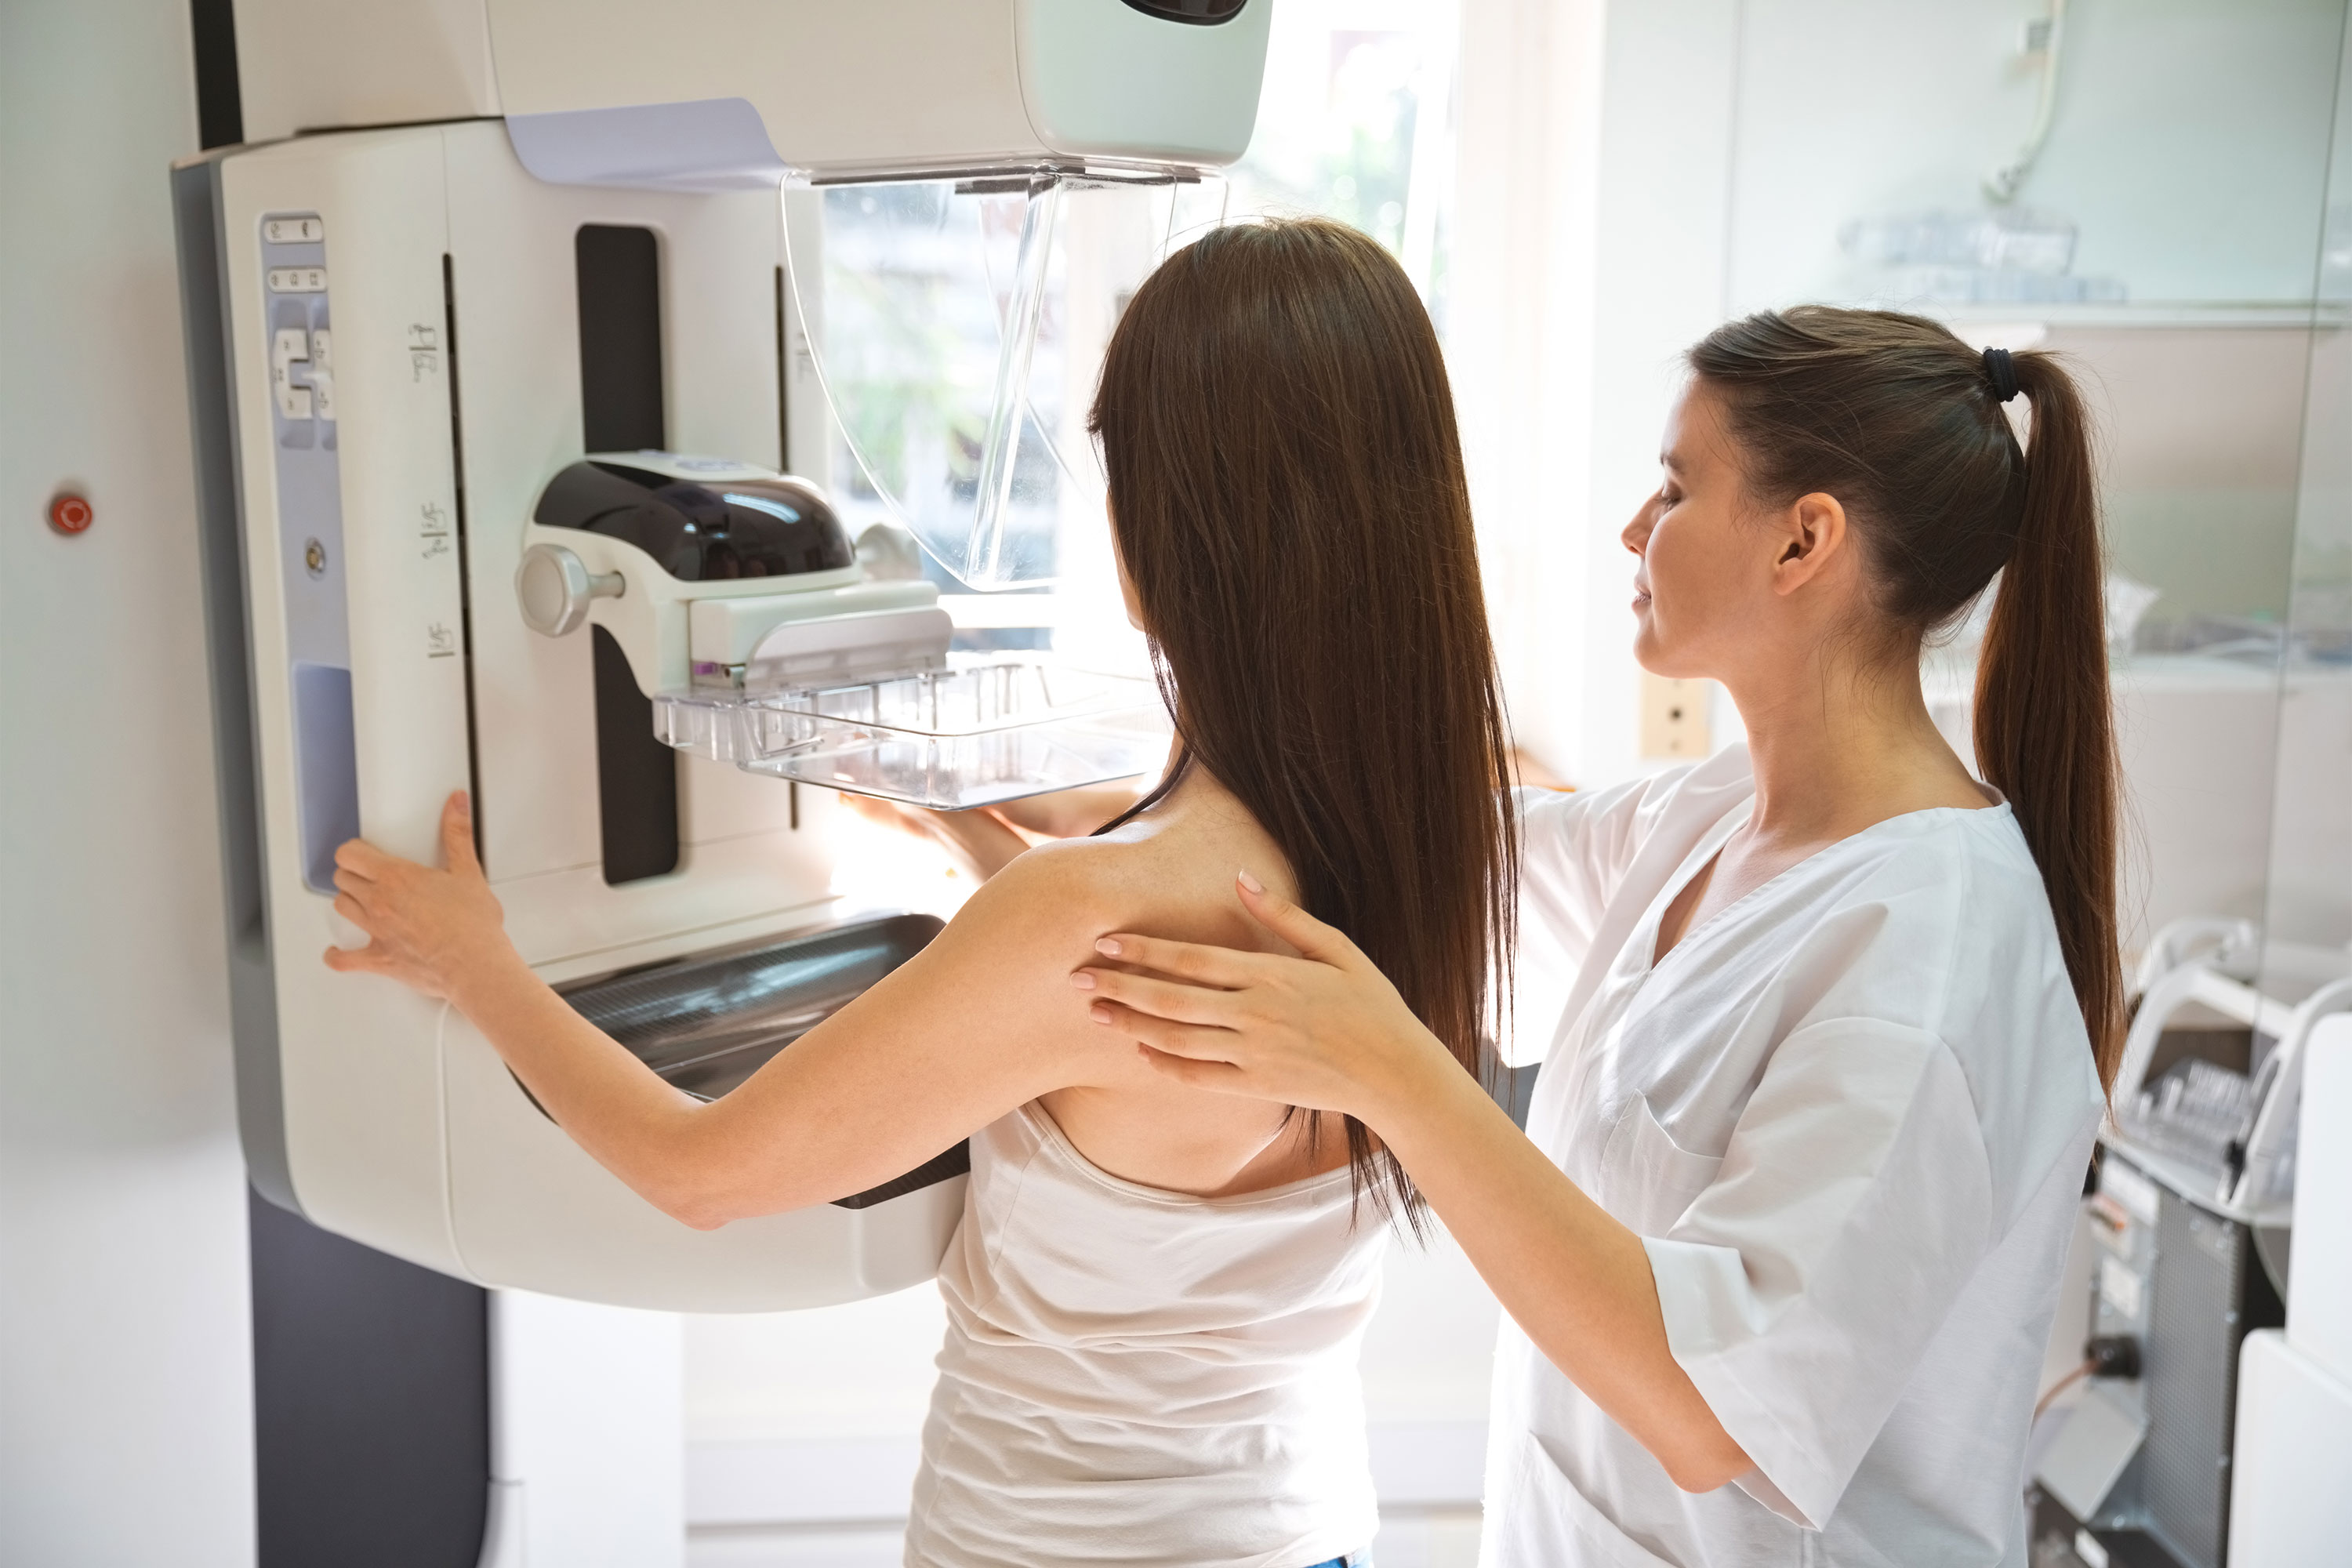 One in three women may receive unnecessary mammograms, study says